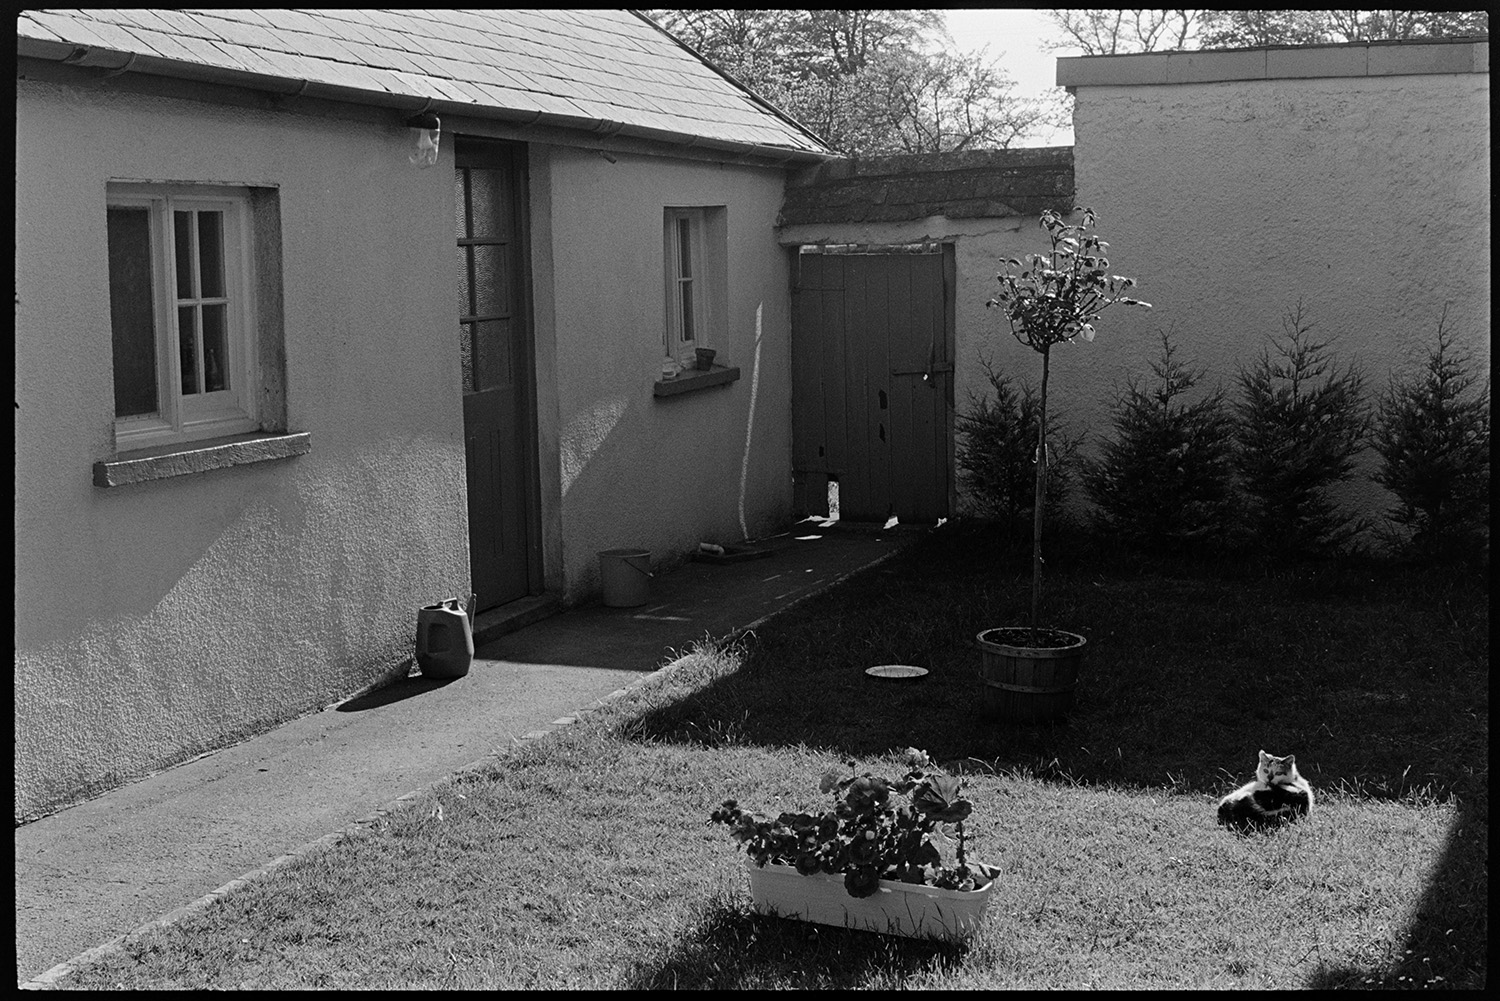 Farm courtyard with cats. 
[A cat lying in the sun in a farm courtyard garden at Westacott Barton, Riddlecombe. Planters and bushes can be seen in the garden which has a wooden gateway at the far end.]